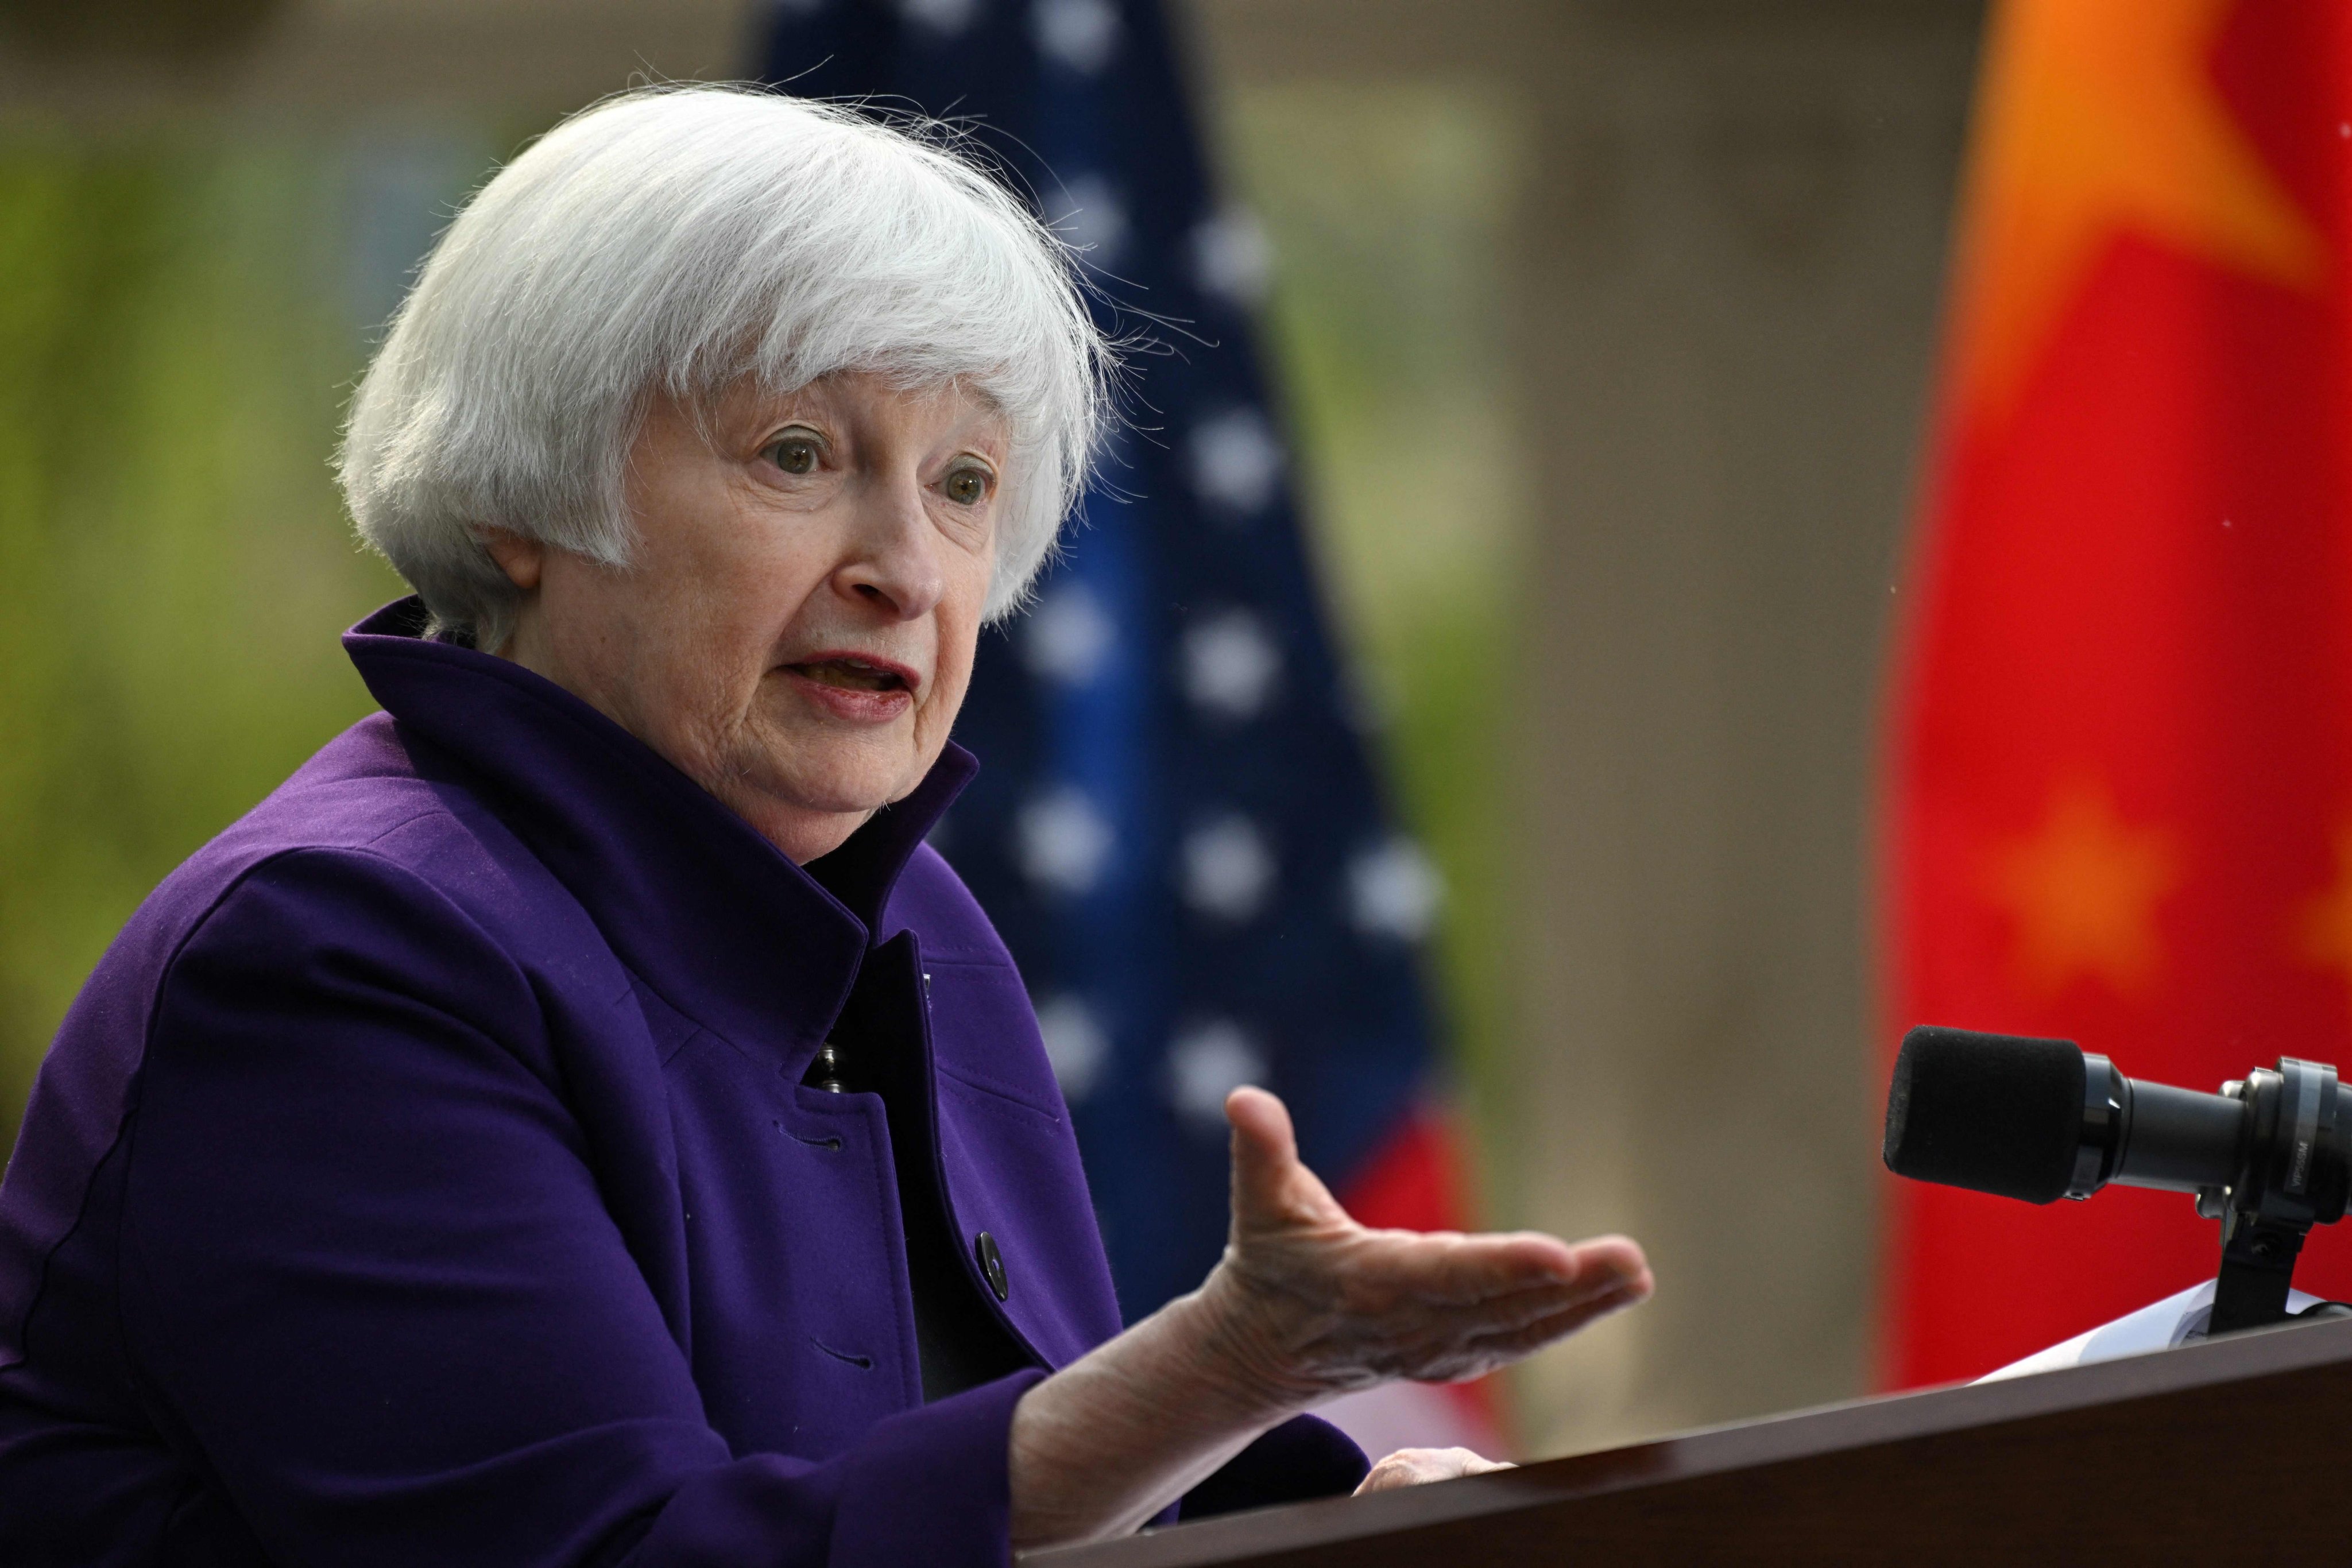 US Treasury Secretary Janet Yellen speaks at a press conference in Beijing on April 8 during her week-long visit to China. Photo: AFP